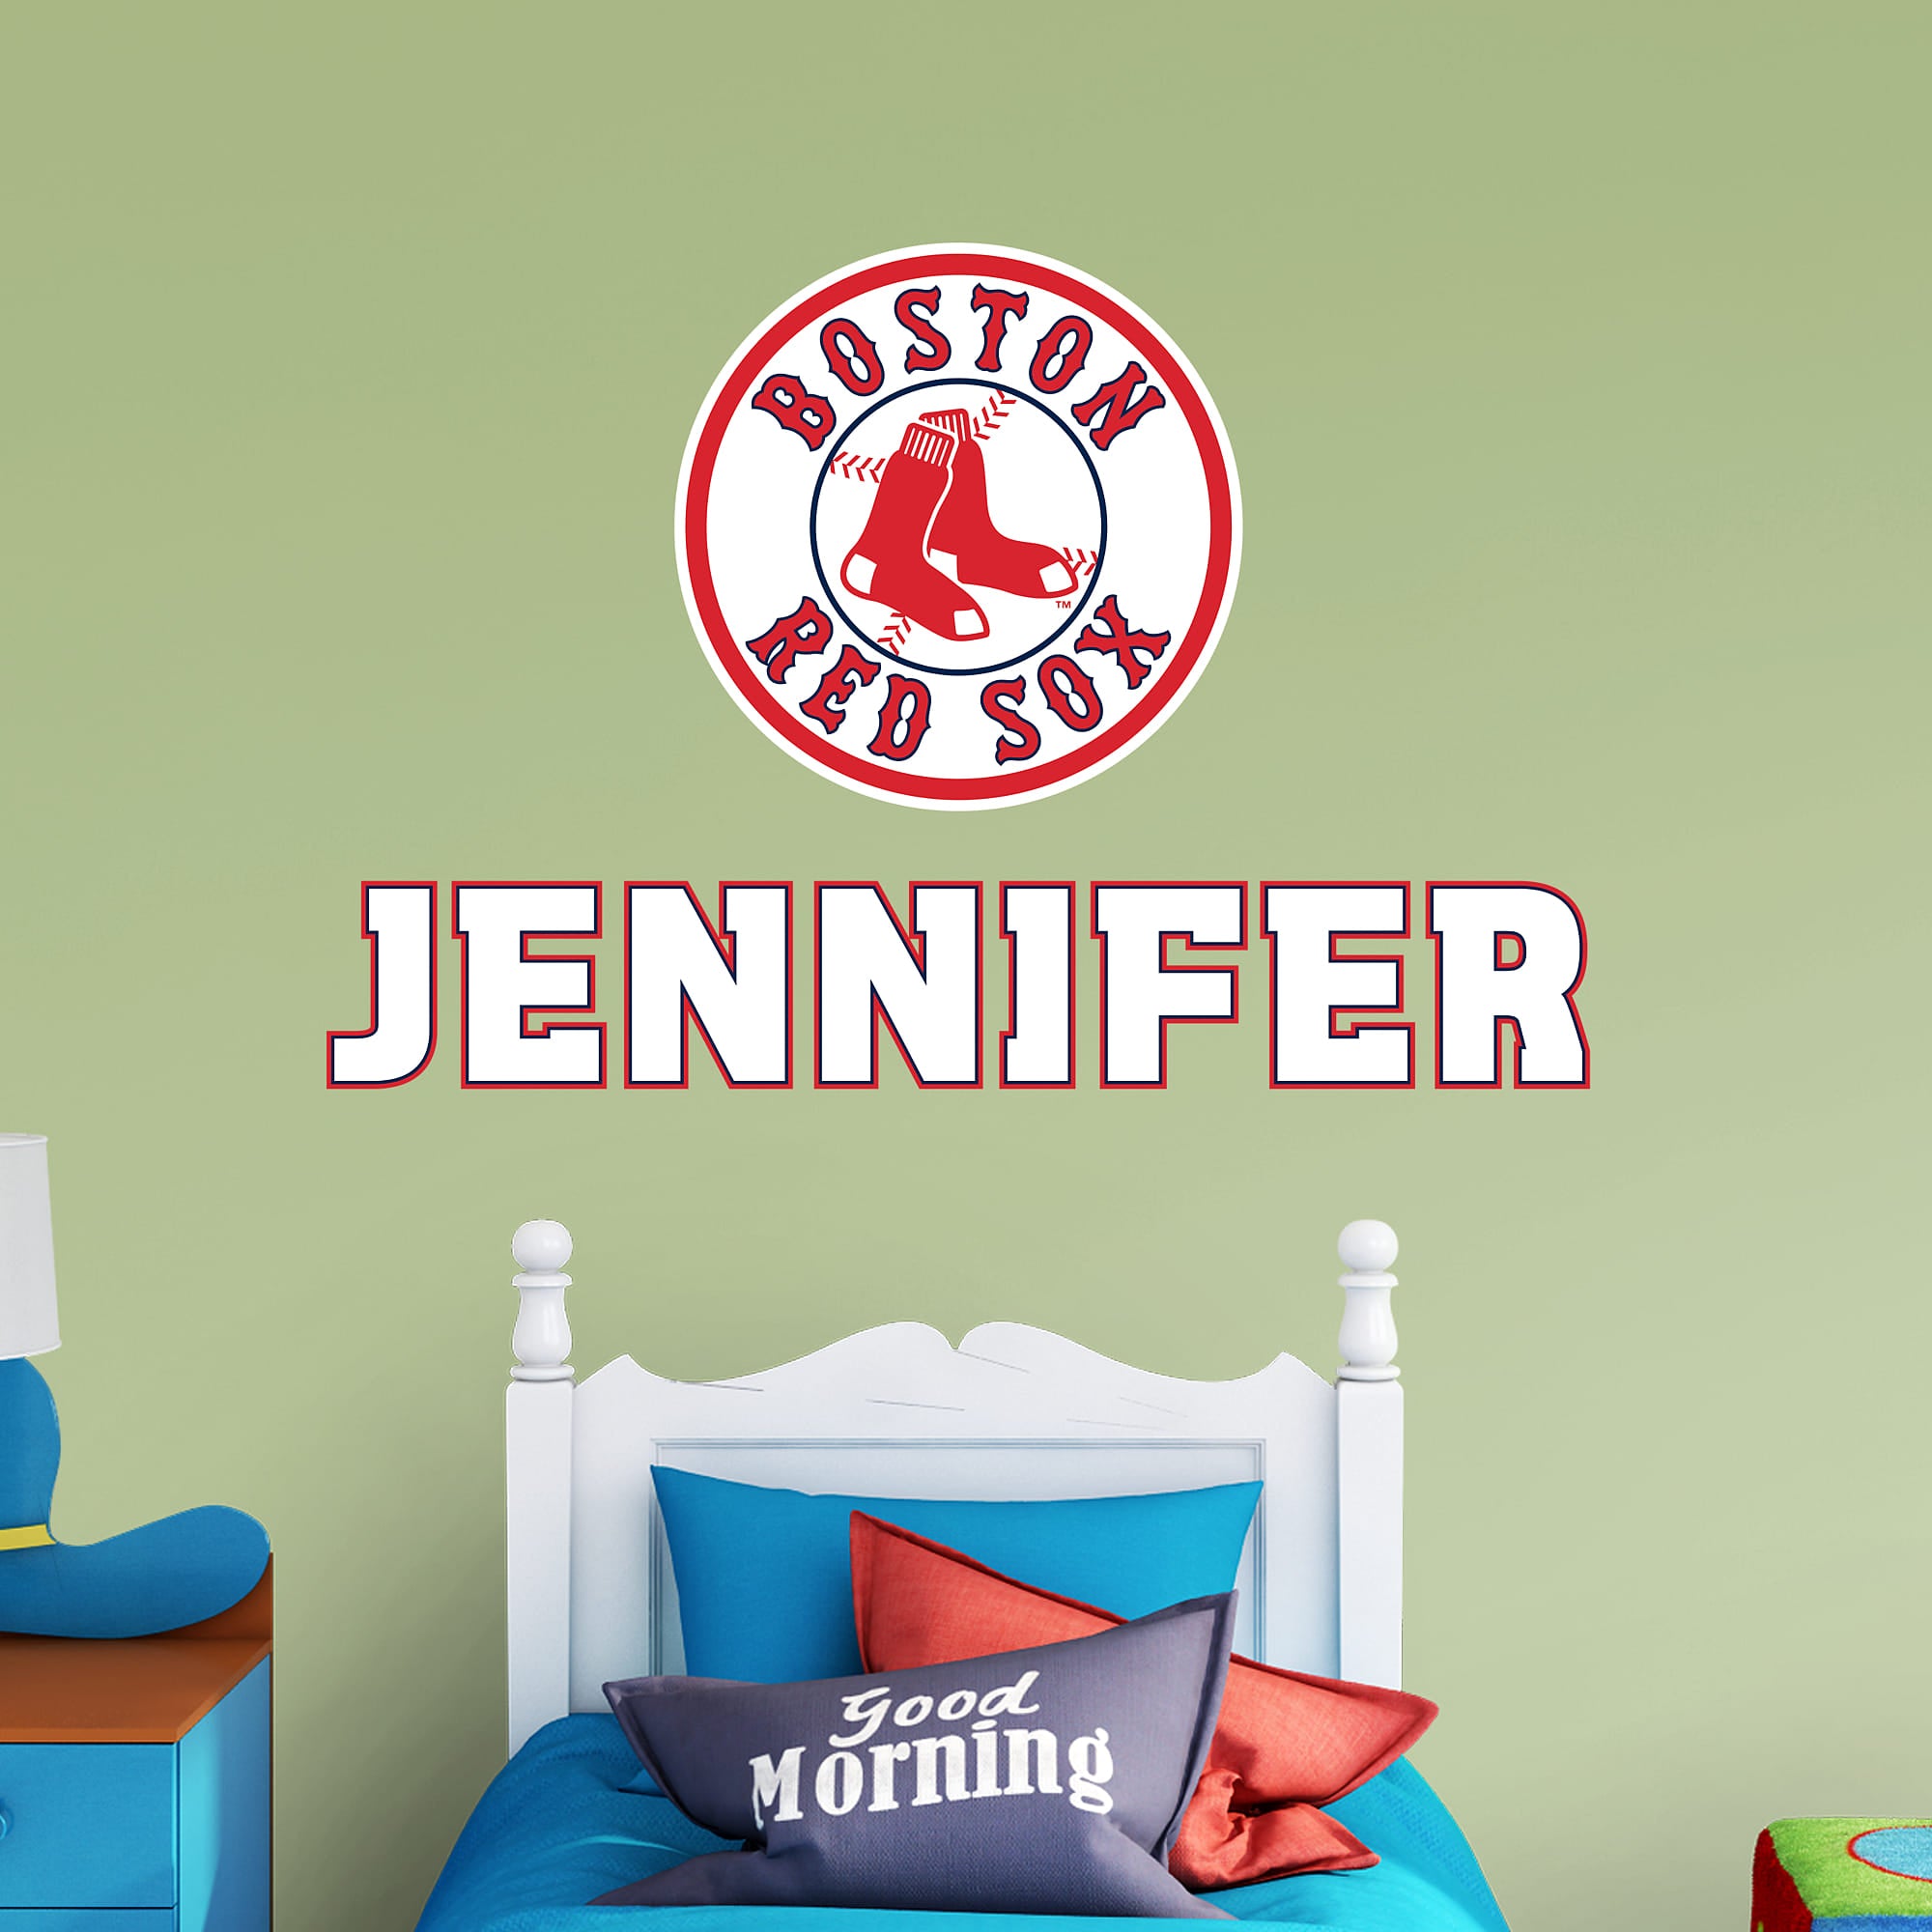 Boston Red Sox: Circle Stacked Personalized Name - Officially Licensed MLB Transfer Decal in White (52"W x 39.5"H) by Fathead |